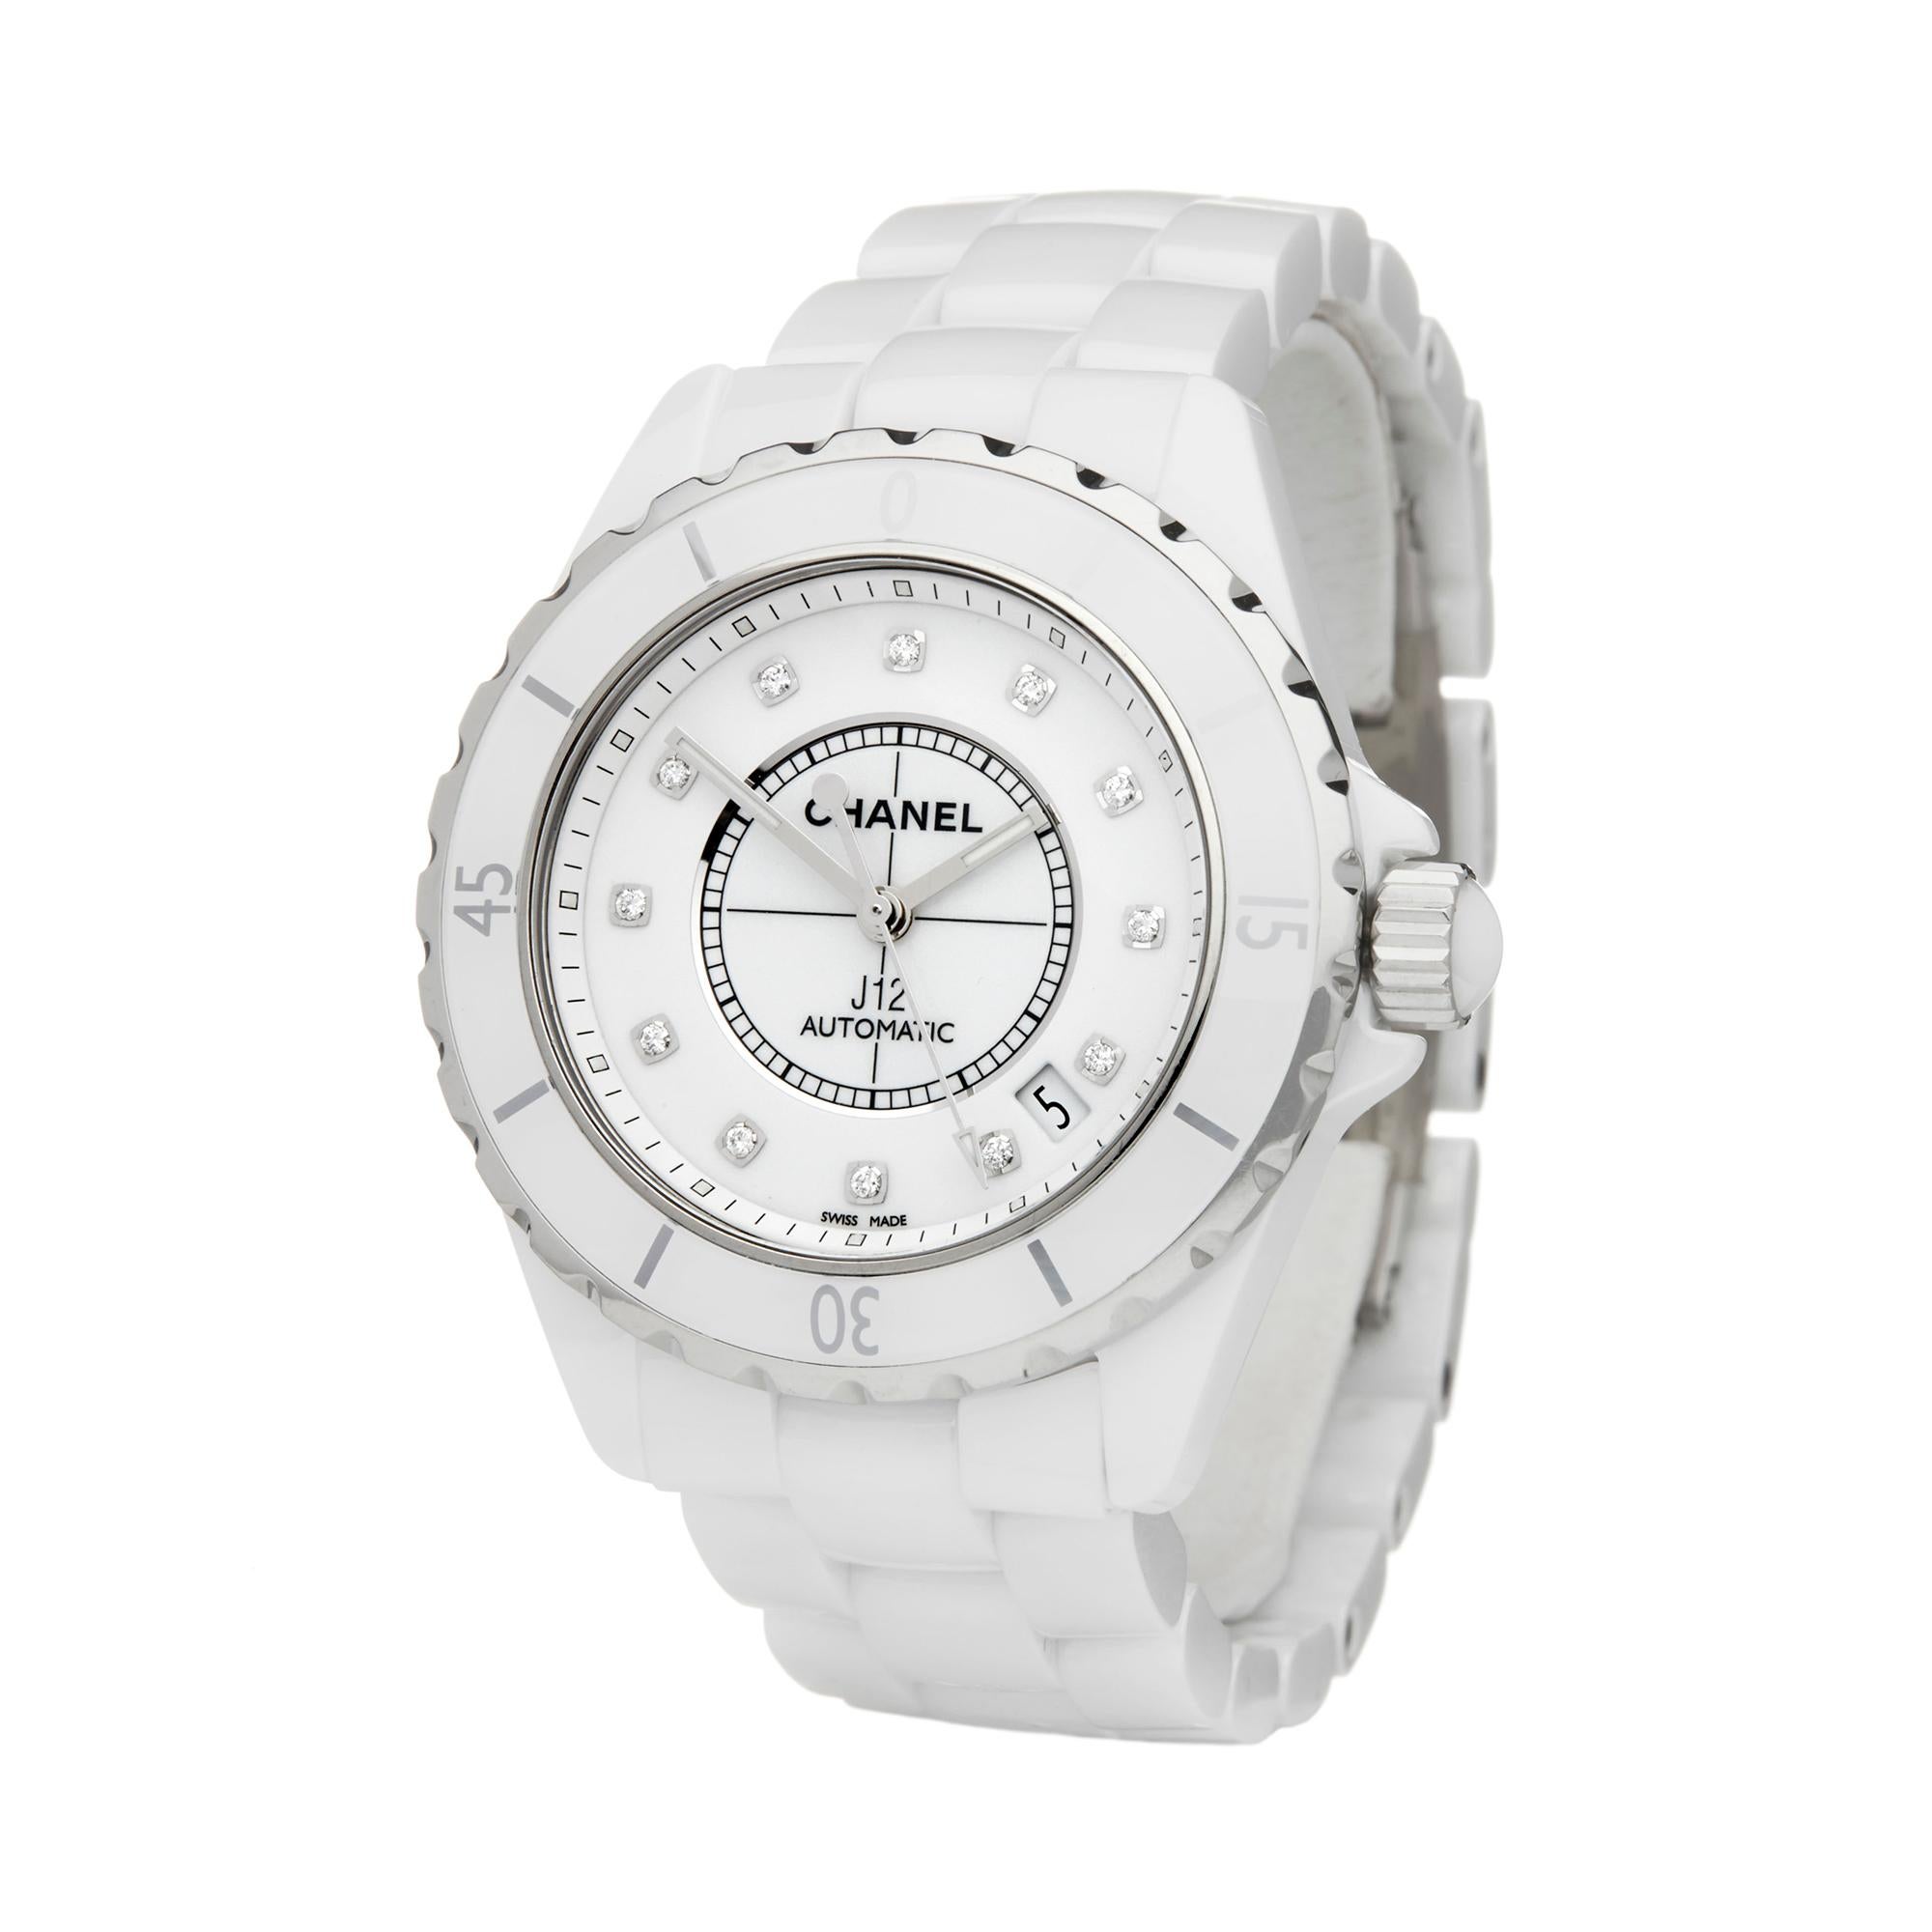 Reference: COM2136
Manufacture: Chanel
Model: J12
Model Reference: H1629
Age: 7th August 2015
Gender: Women's
Box and Papers: Box, Manuals and Guarantee
Dial: White Diamond
Glass: Sapphire Crystal
Movement: Automatic
Water Resistance: To